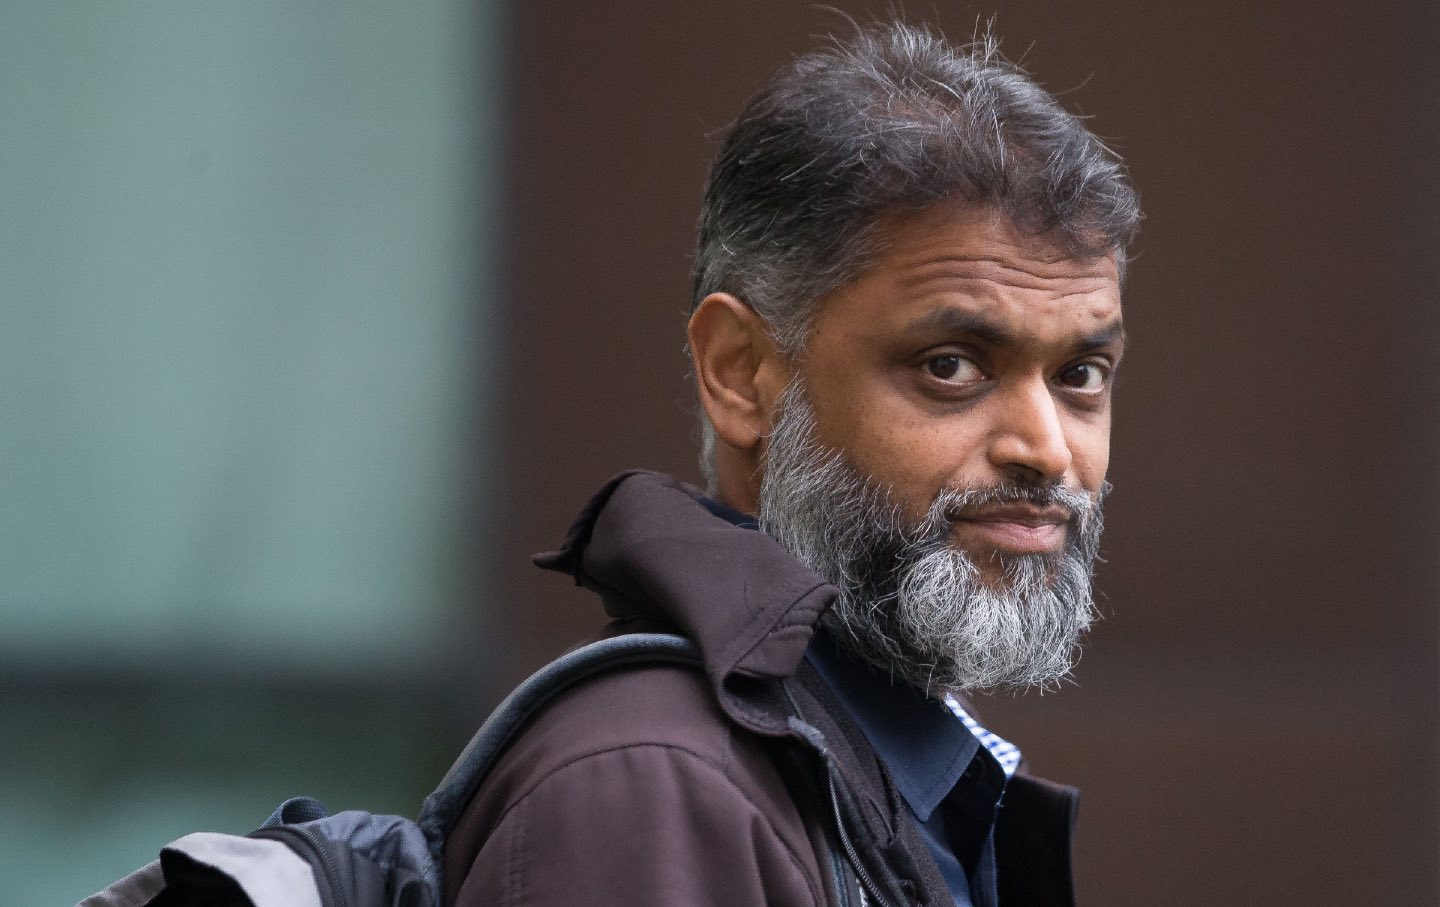 Former Guantánamo Bay detainee Moazzam Begg, a British citizen, arrives at Westminster Magistrates' Court in London on September 25, 2017.